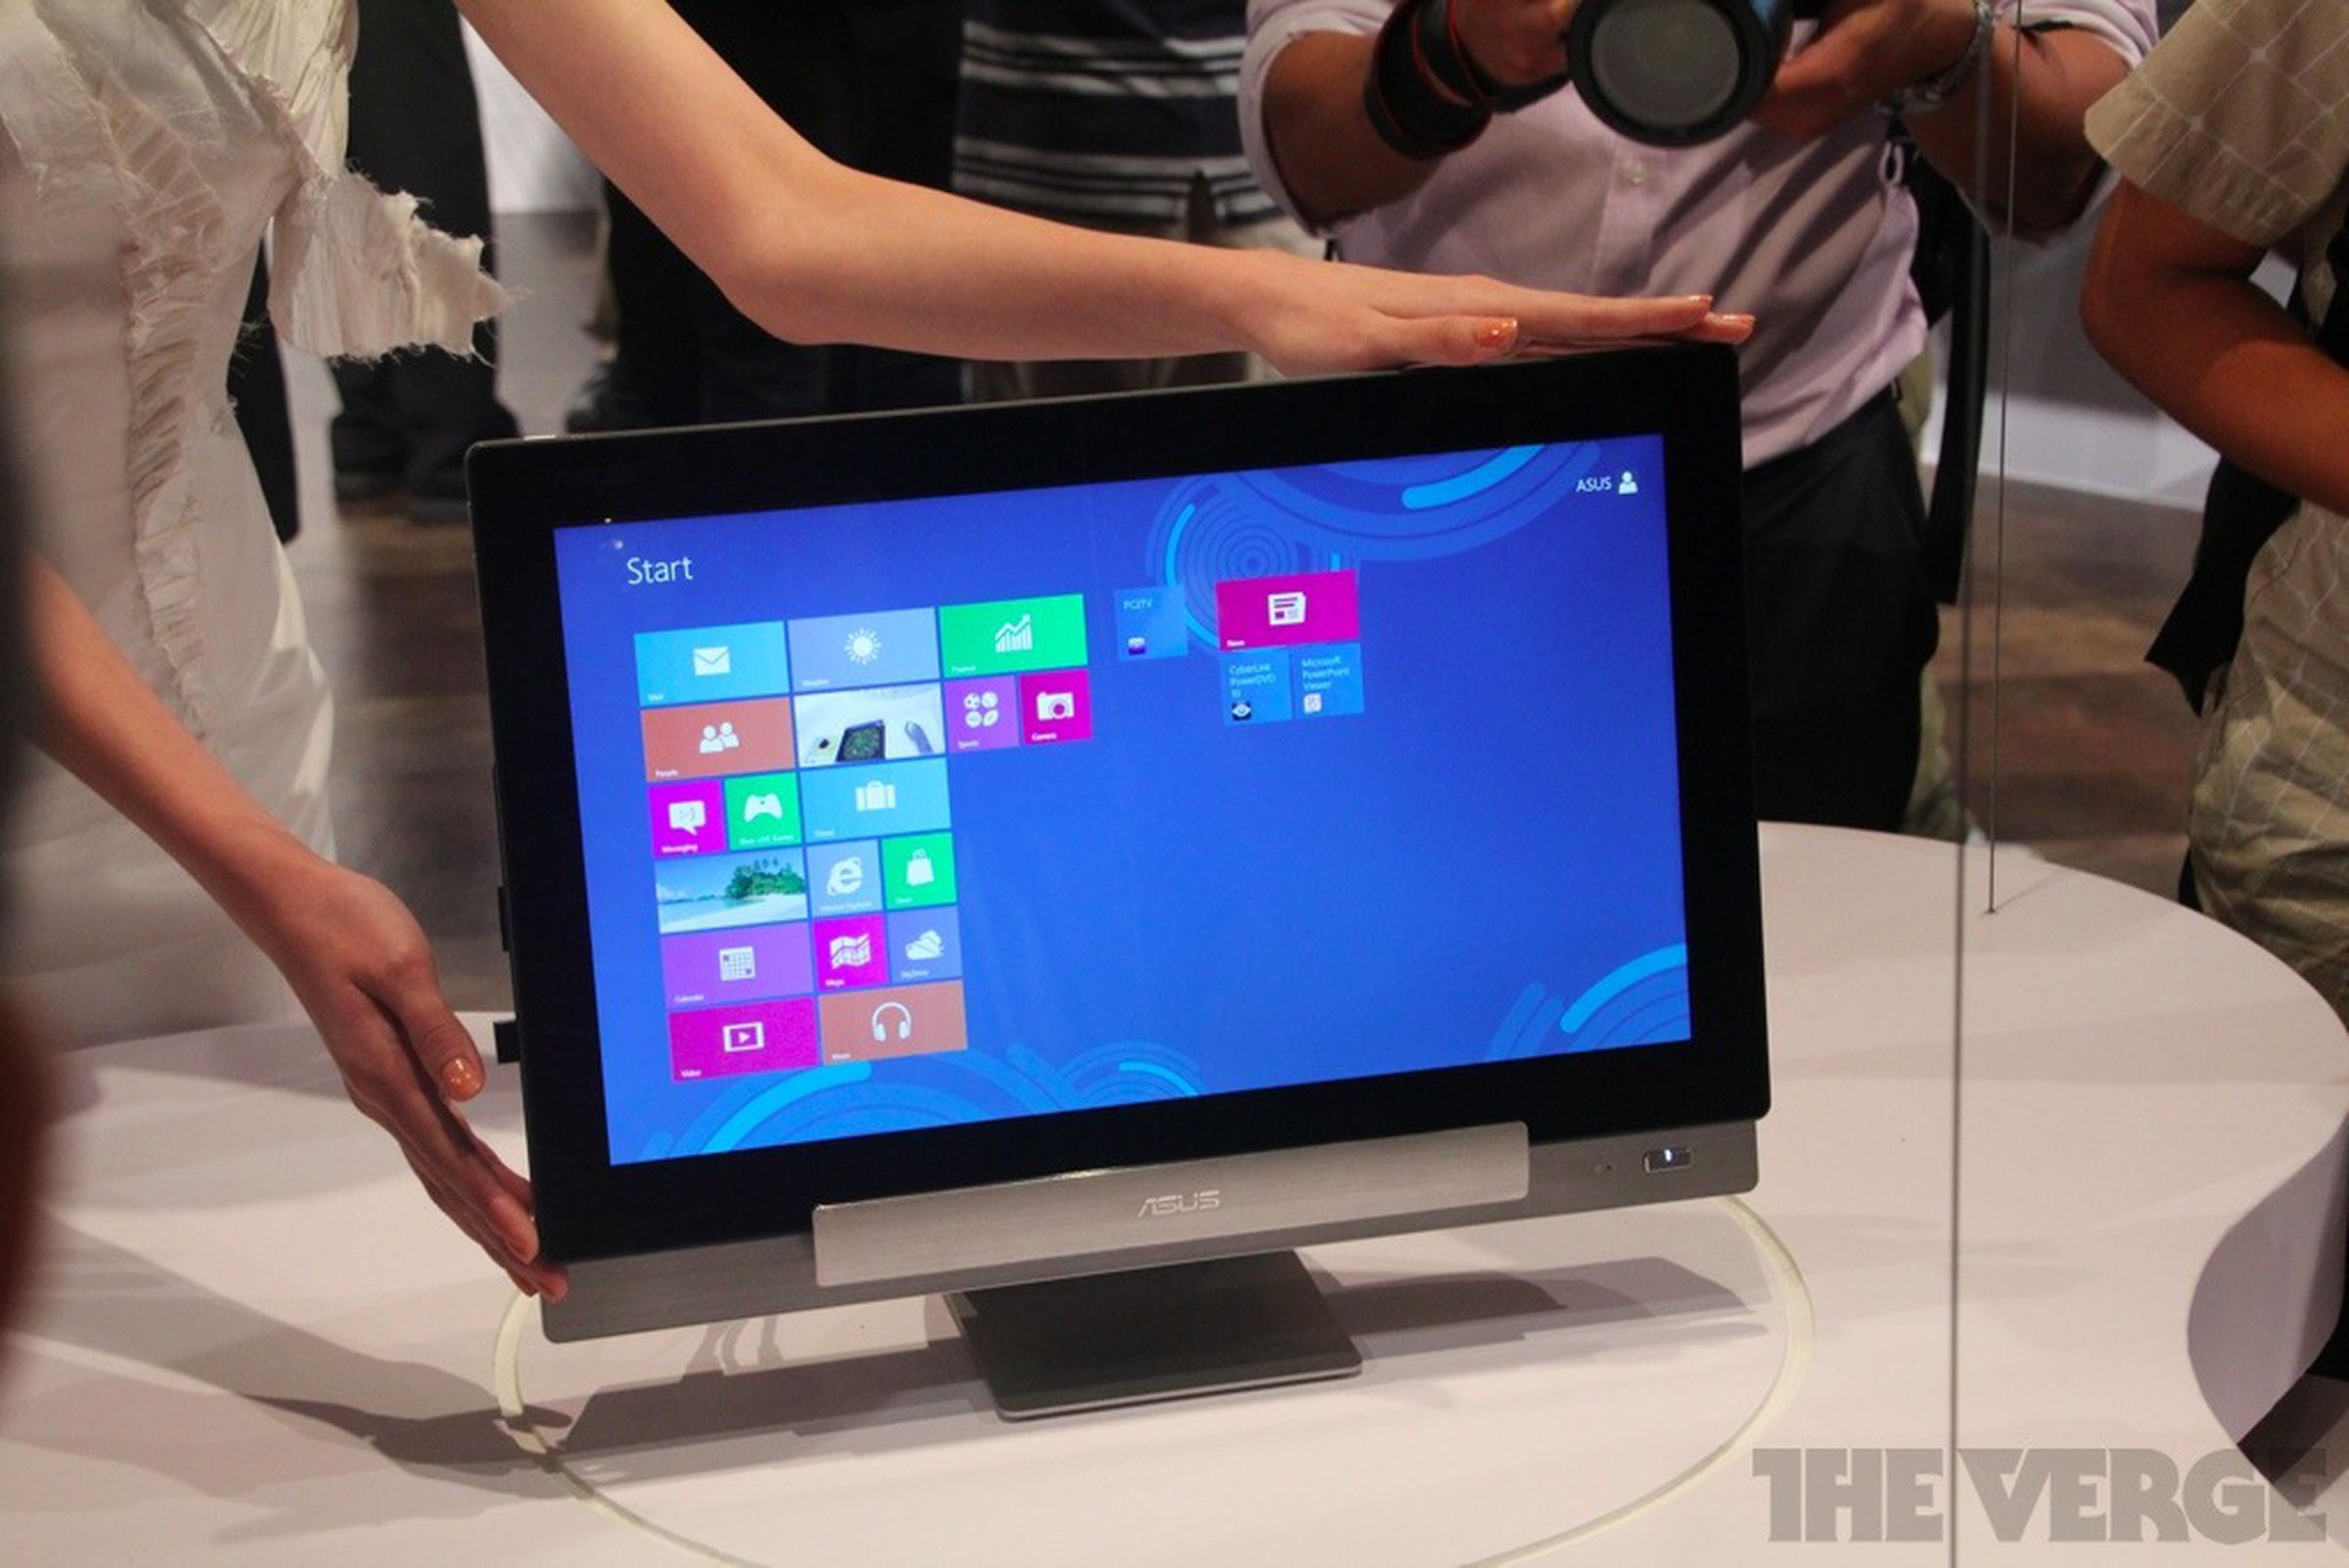 Asus Transformer all-in-one photos